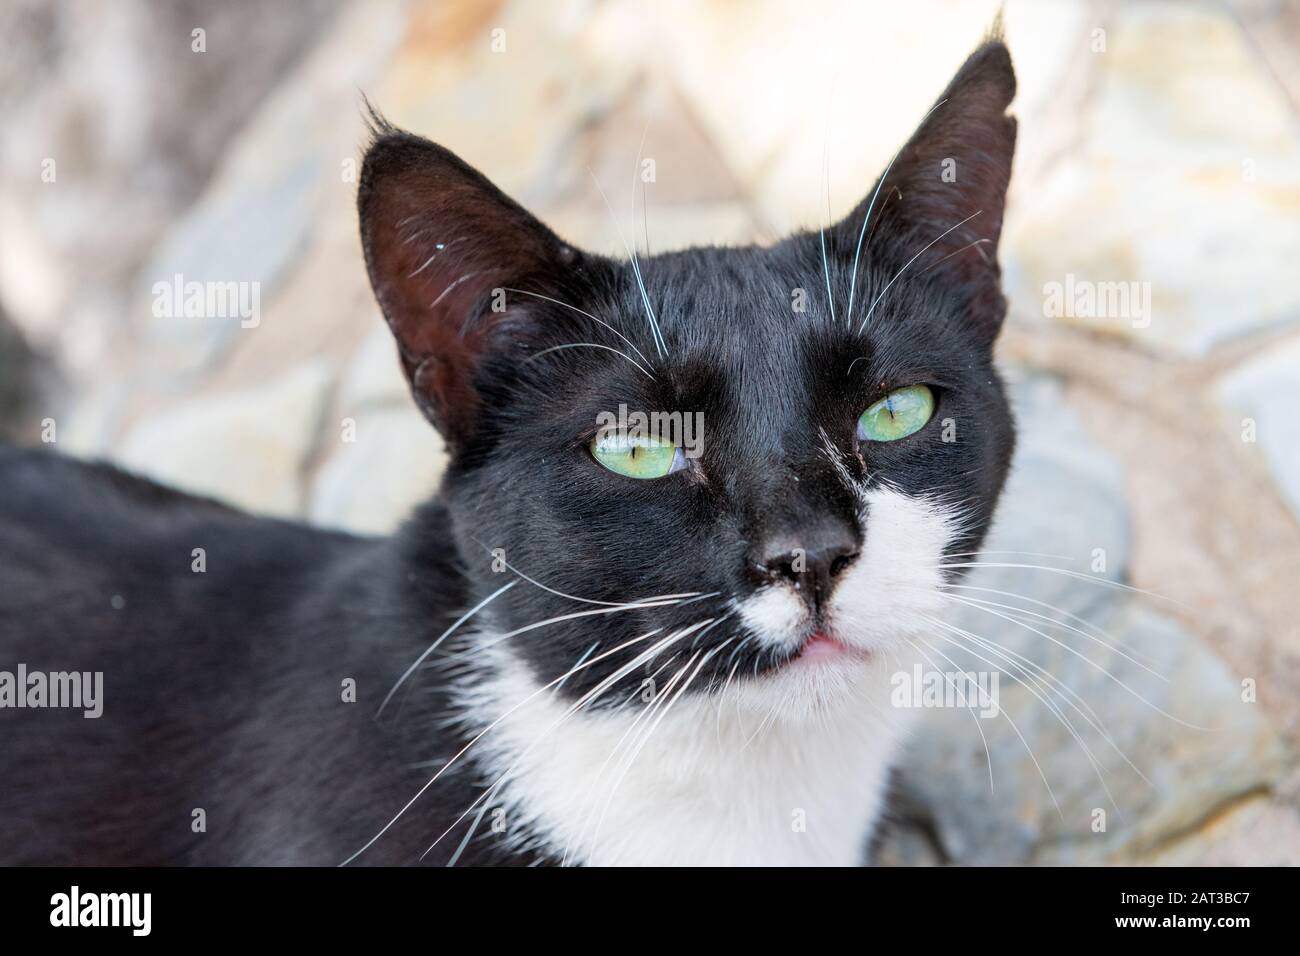 Black and white cat looking at the camera. Stock Photo